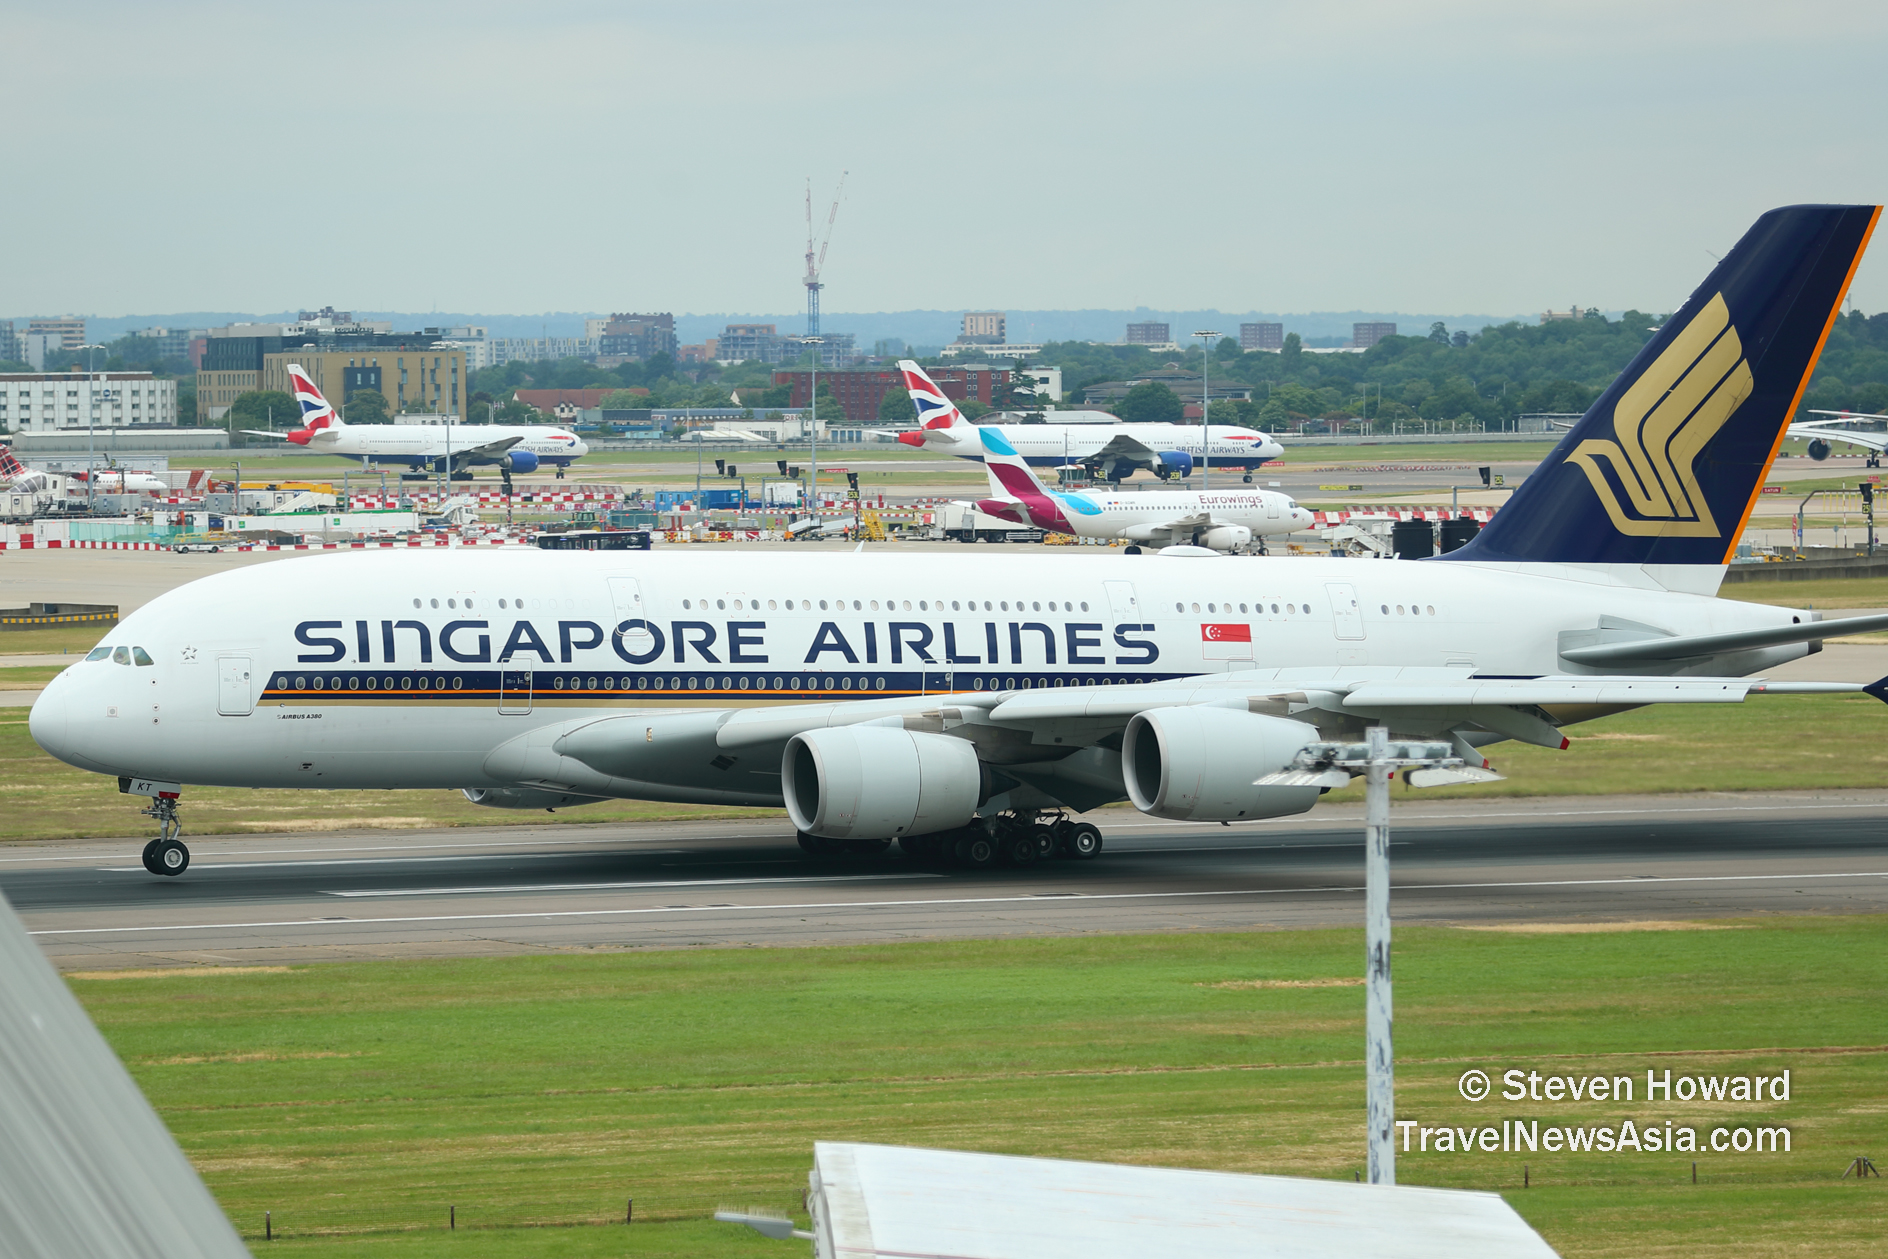 Singapore Airlines A380 reg: 9V-SKT. Picture by Steven Howard of TravelNewsAsia.com Click to enlarge.